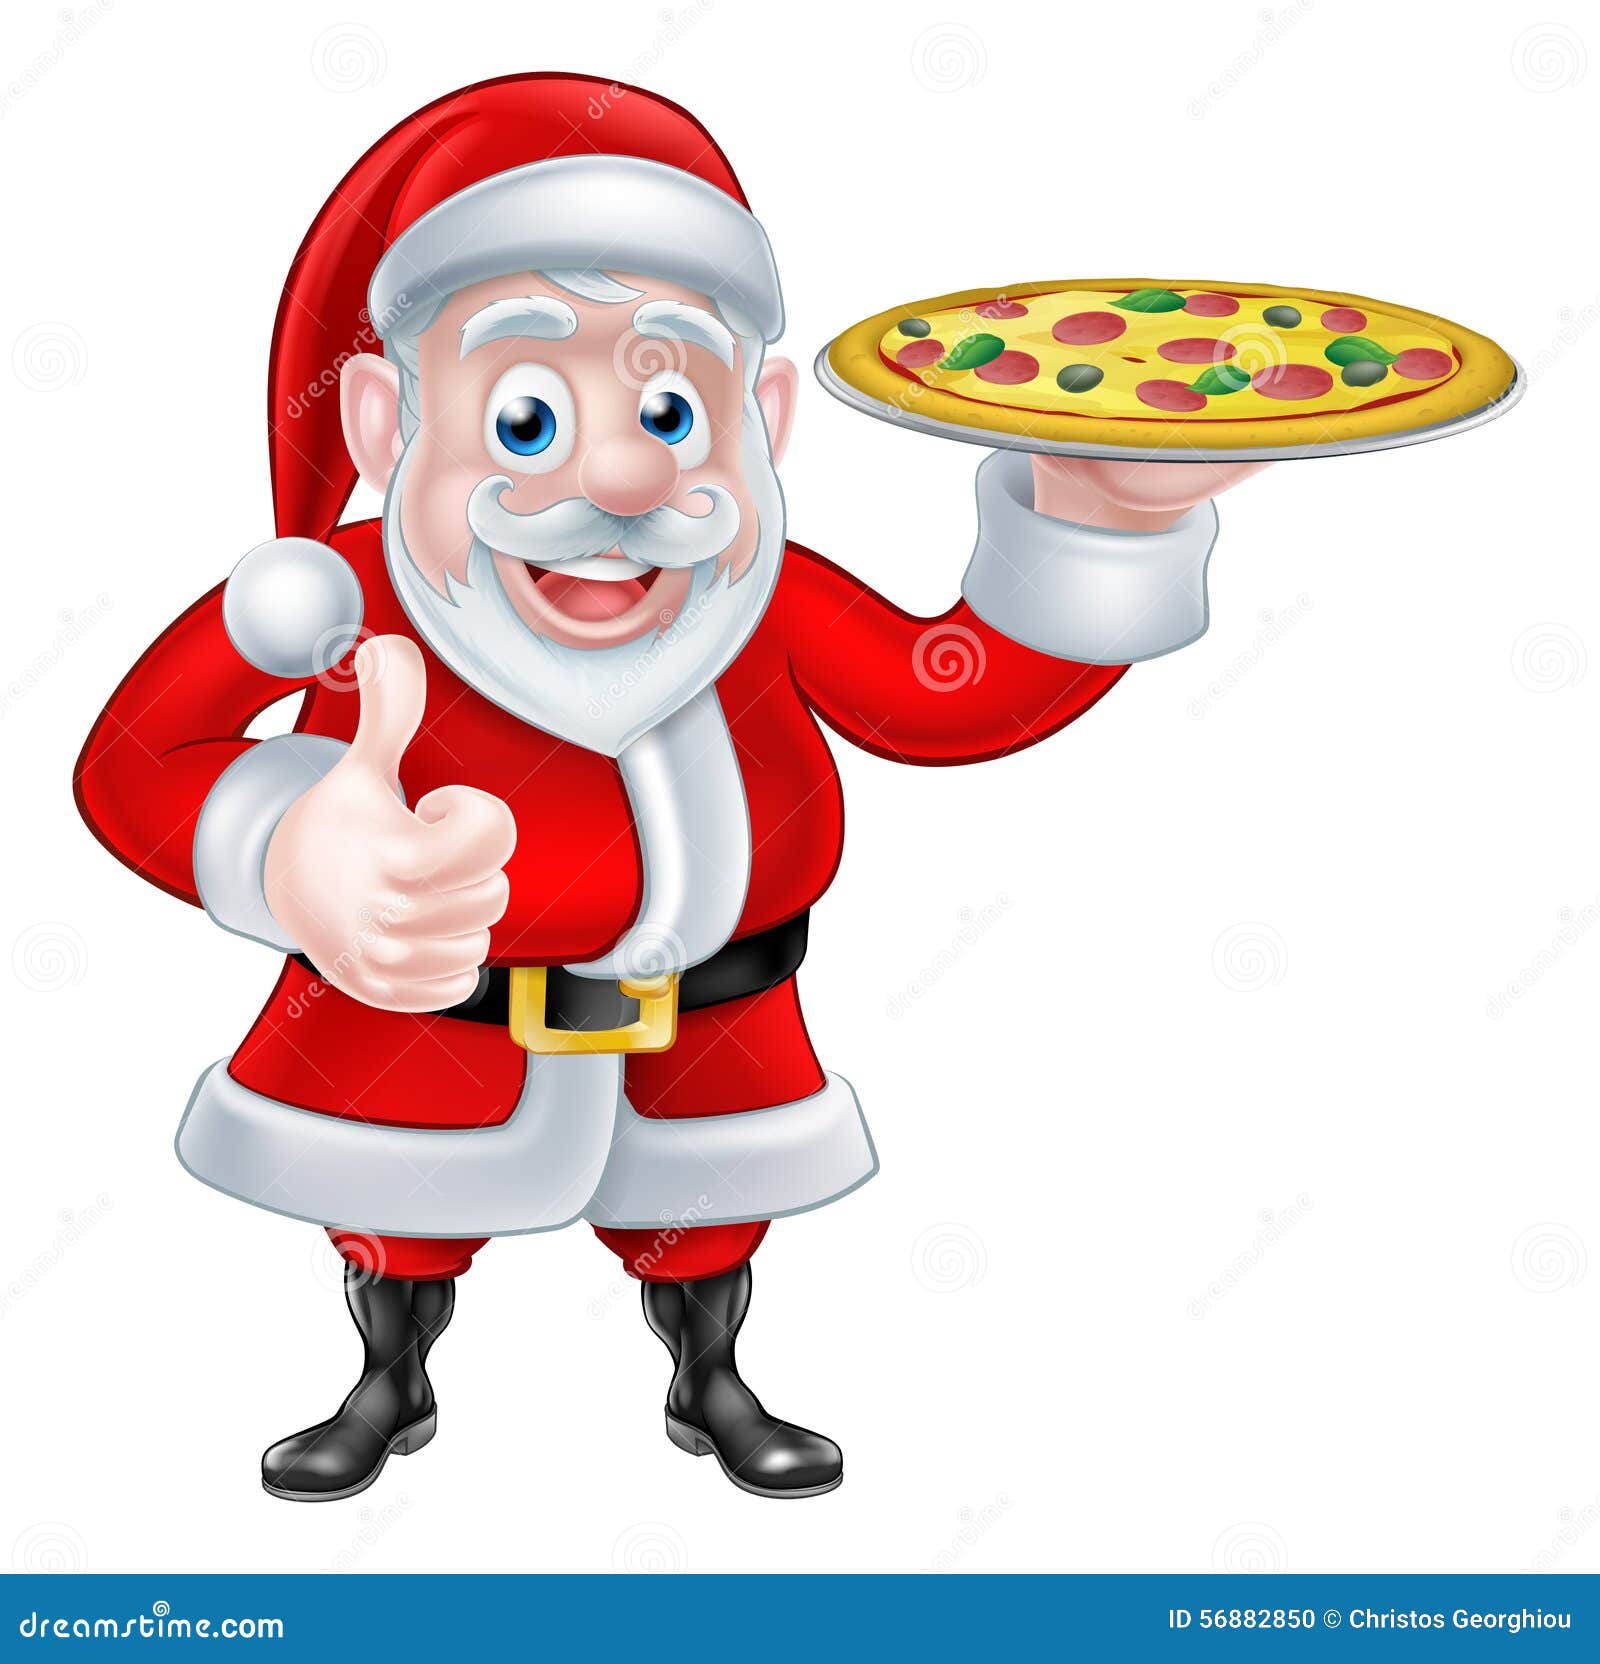 Funny Pizza Santa Claus 3dRose Alexis Design T-Shirts A Colorful Text Happy Pizzas All Year Round Funny Characters 